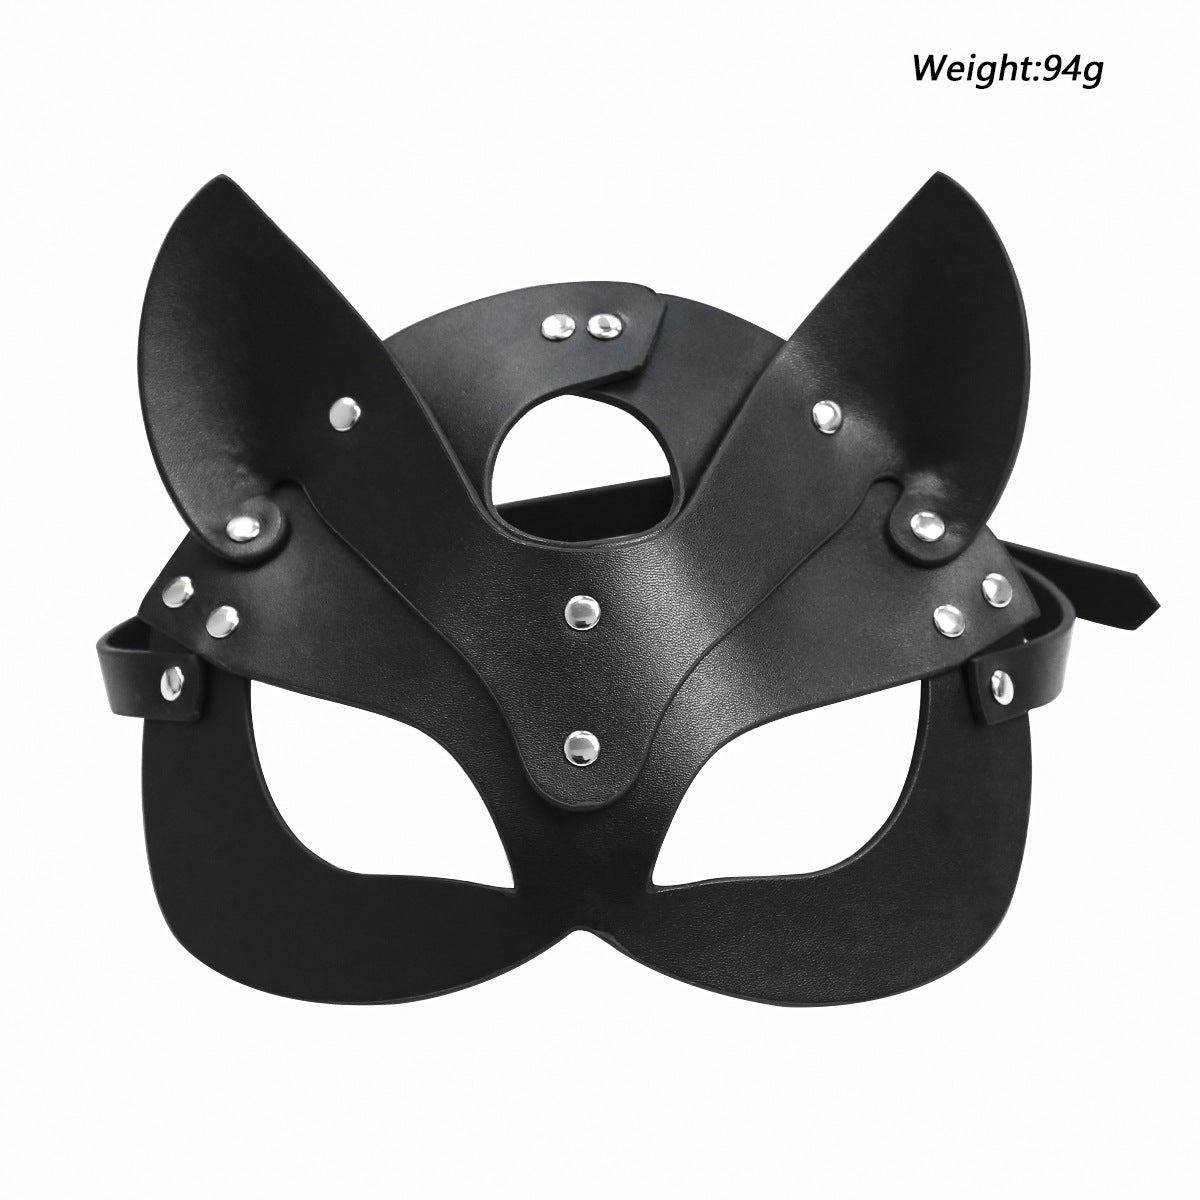 Sexy Leather Cat's Ear Mask